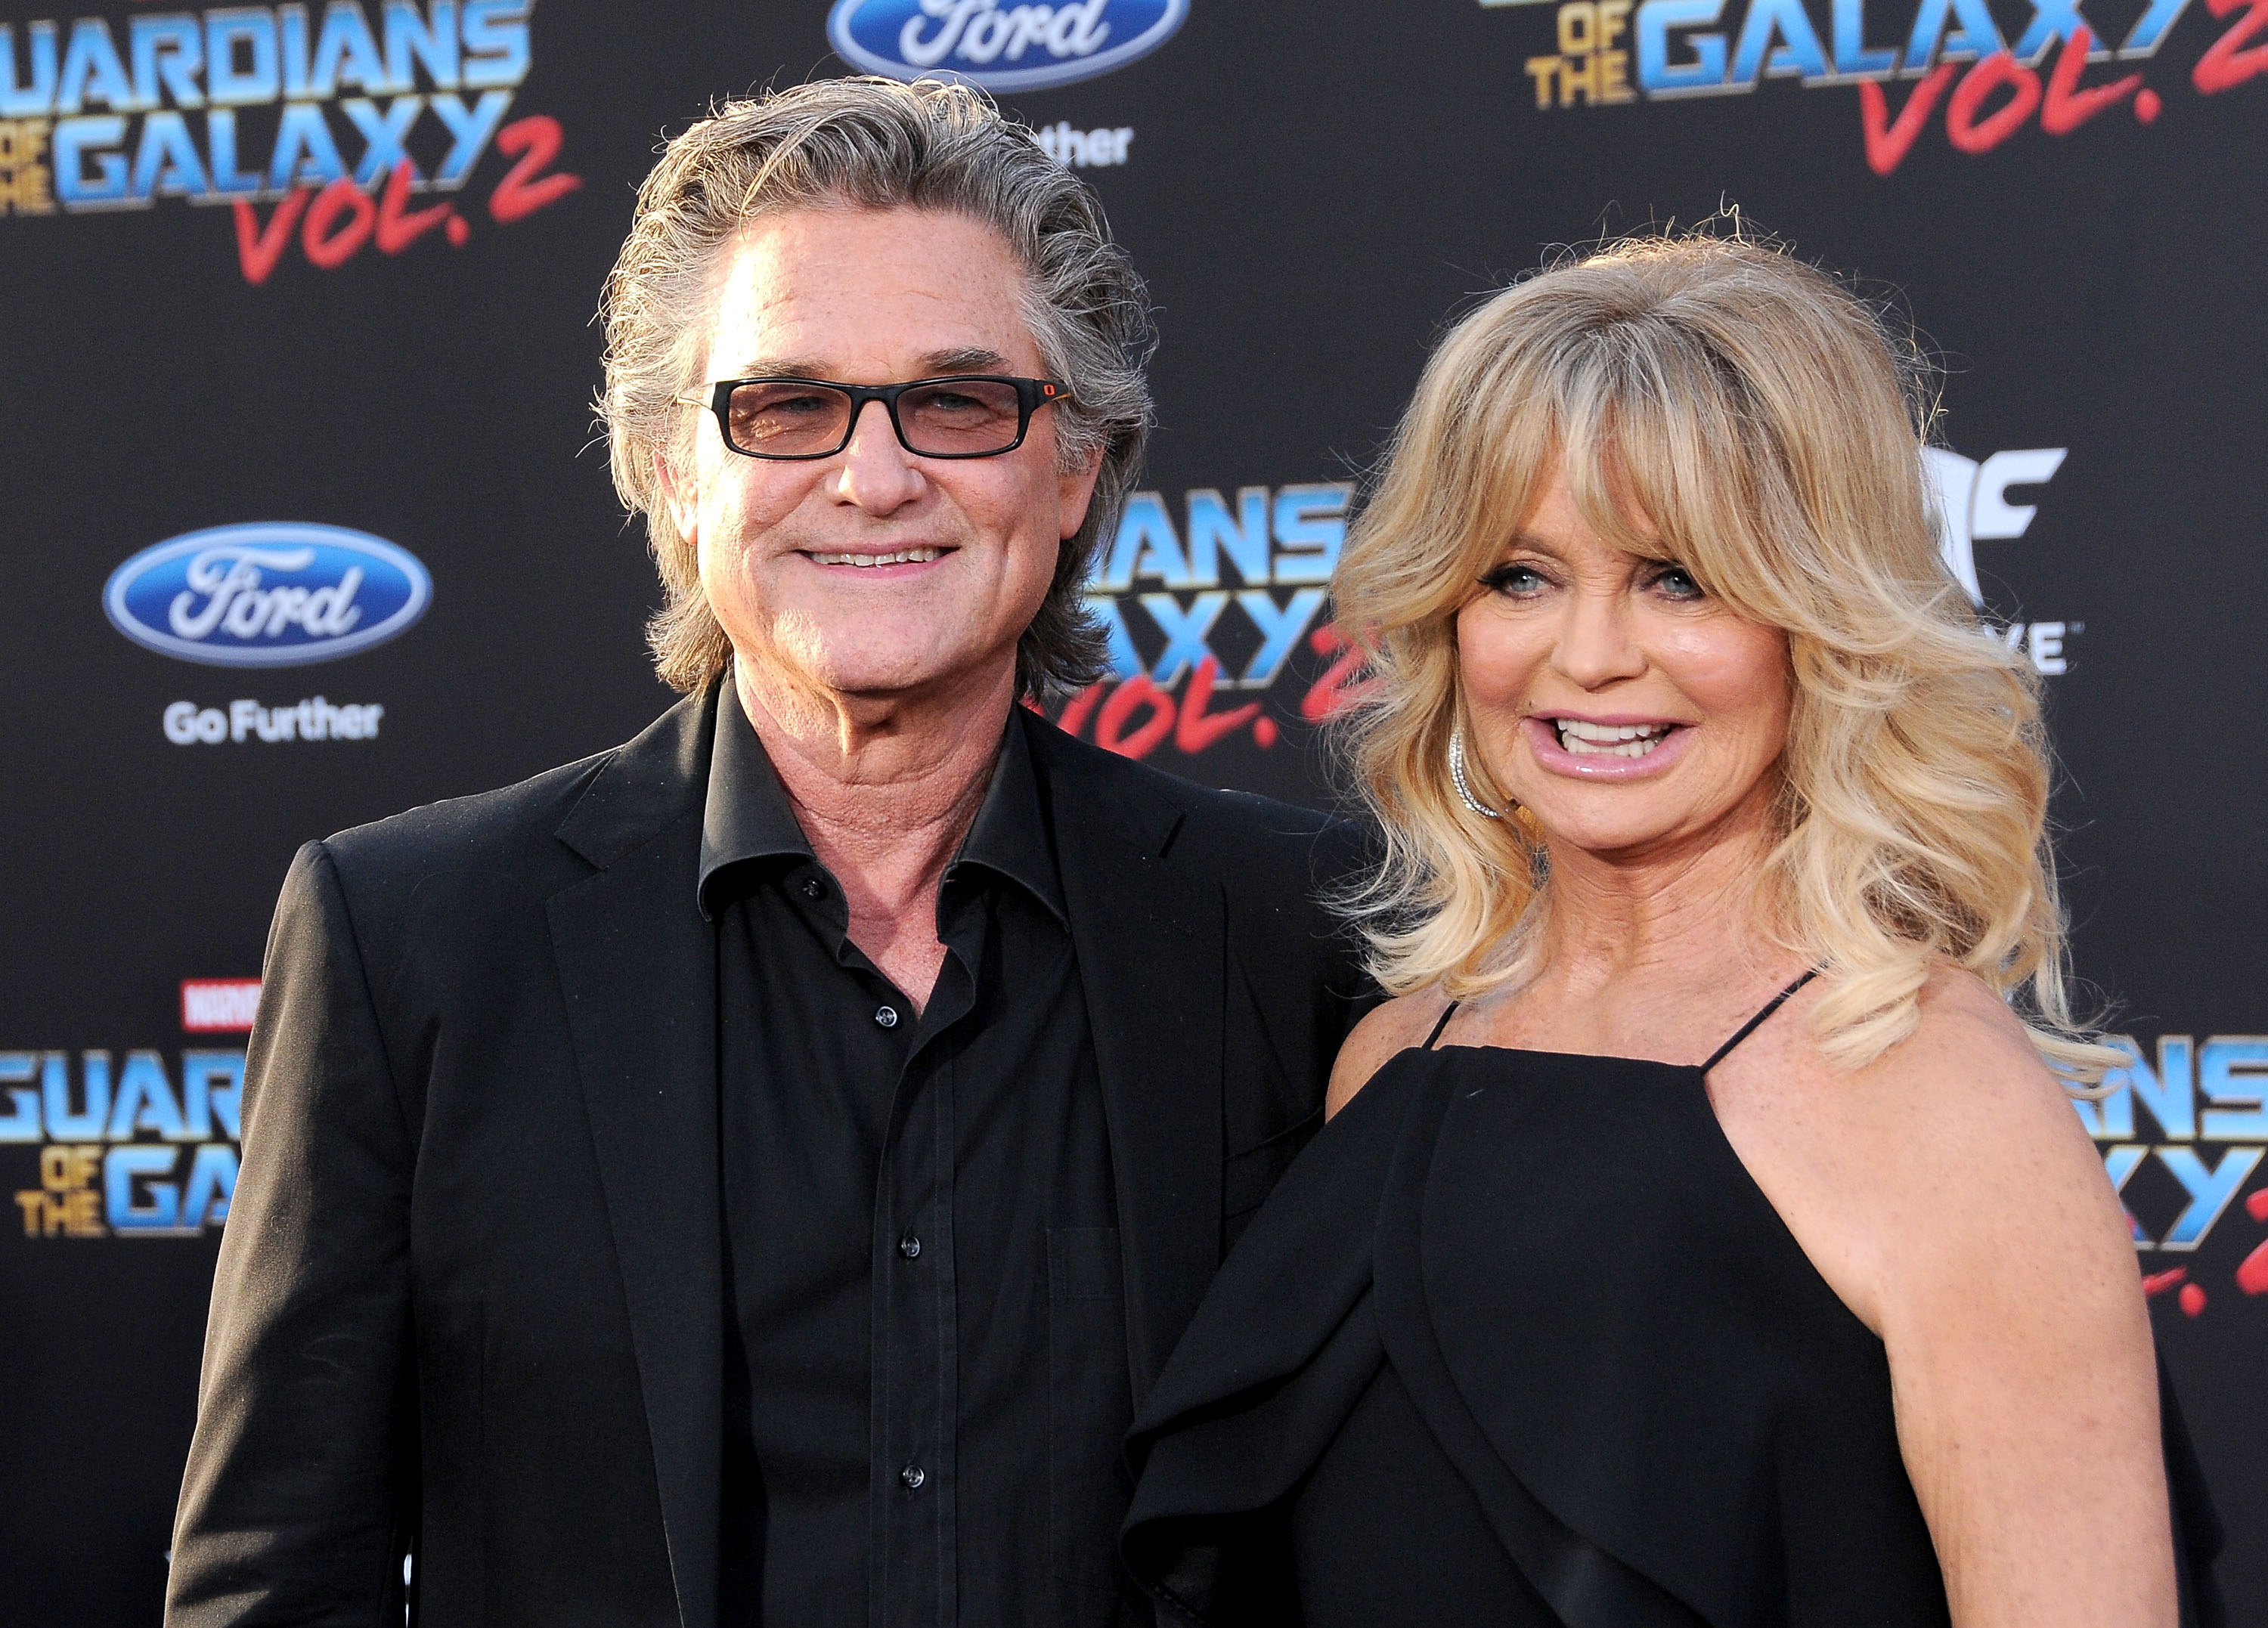 (L-R) Kurt Russell and Goldie Hawn attend the premiere of Disney and Marvel's 'Guardians Of The Galaxy Vol. 2' on April 19, 2017 in Hollywood, California.